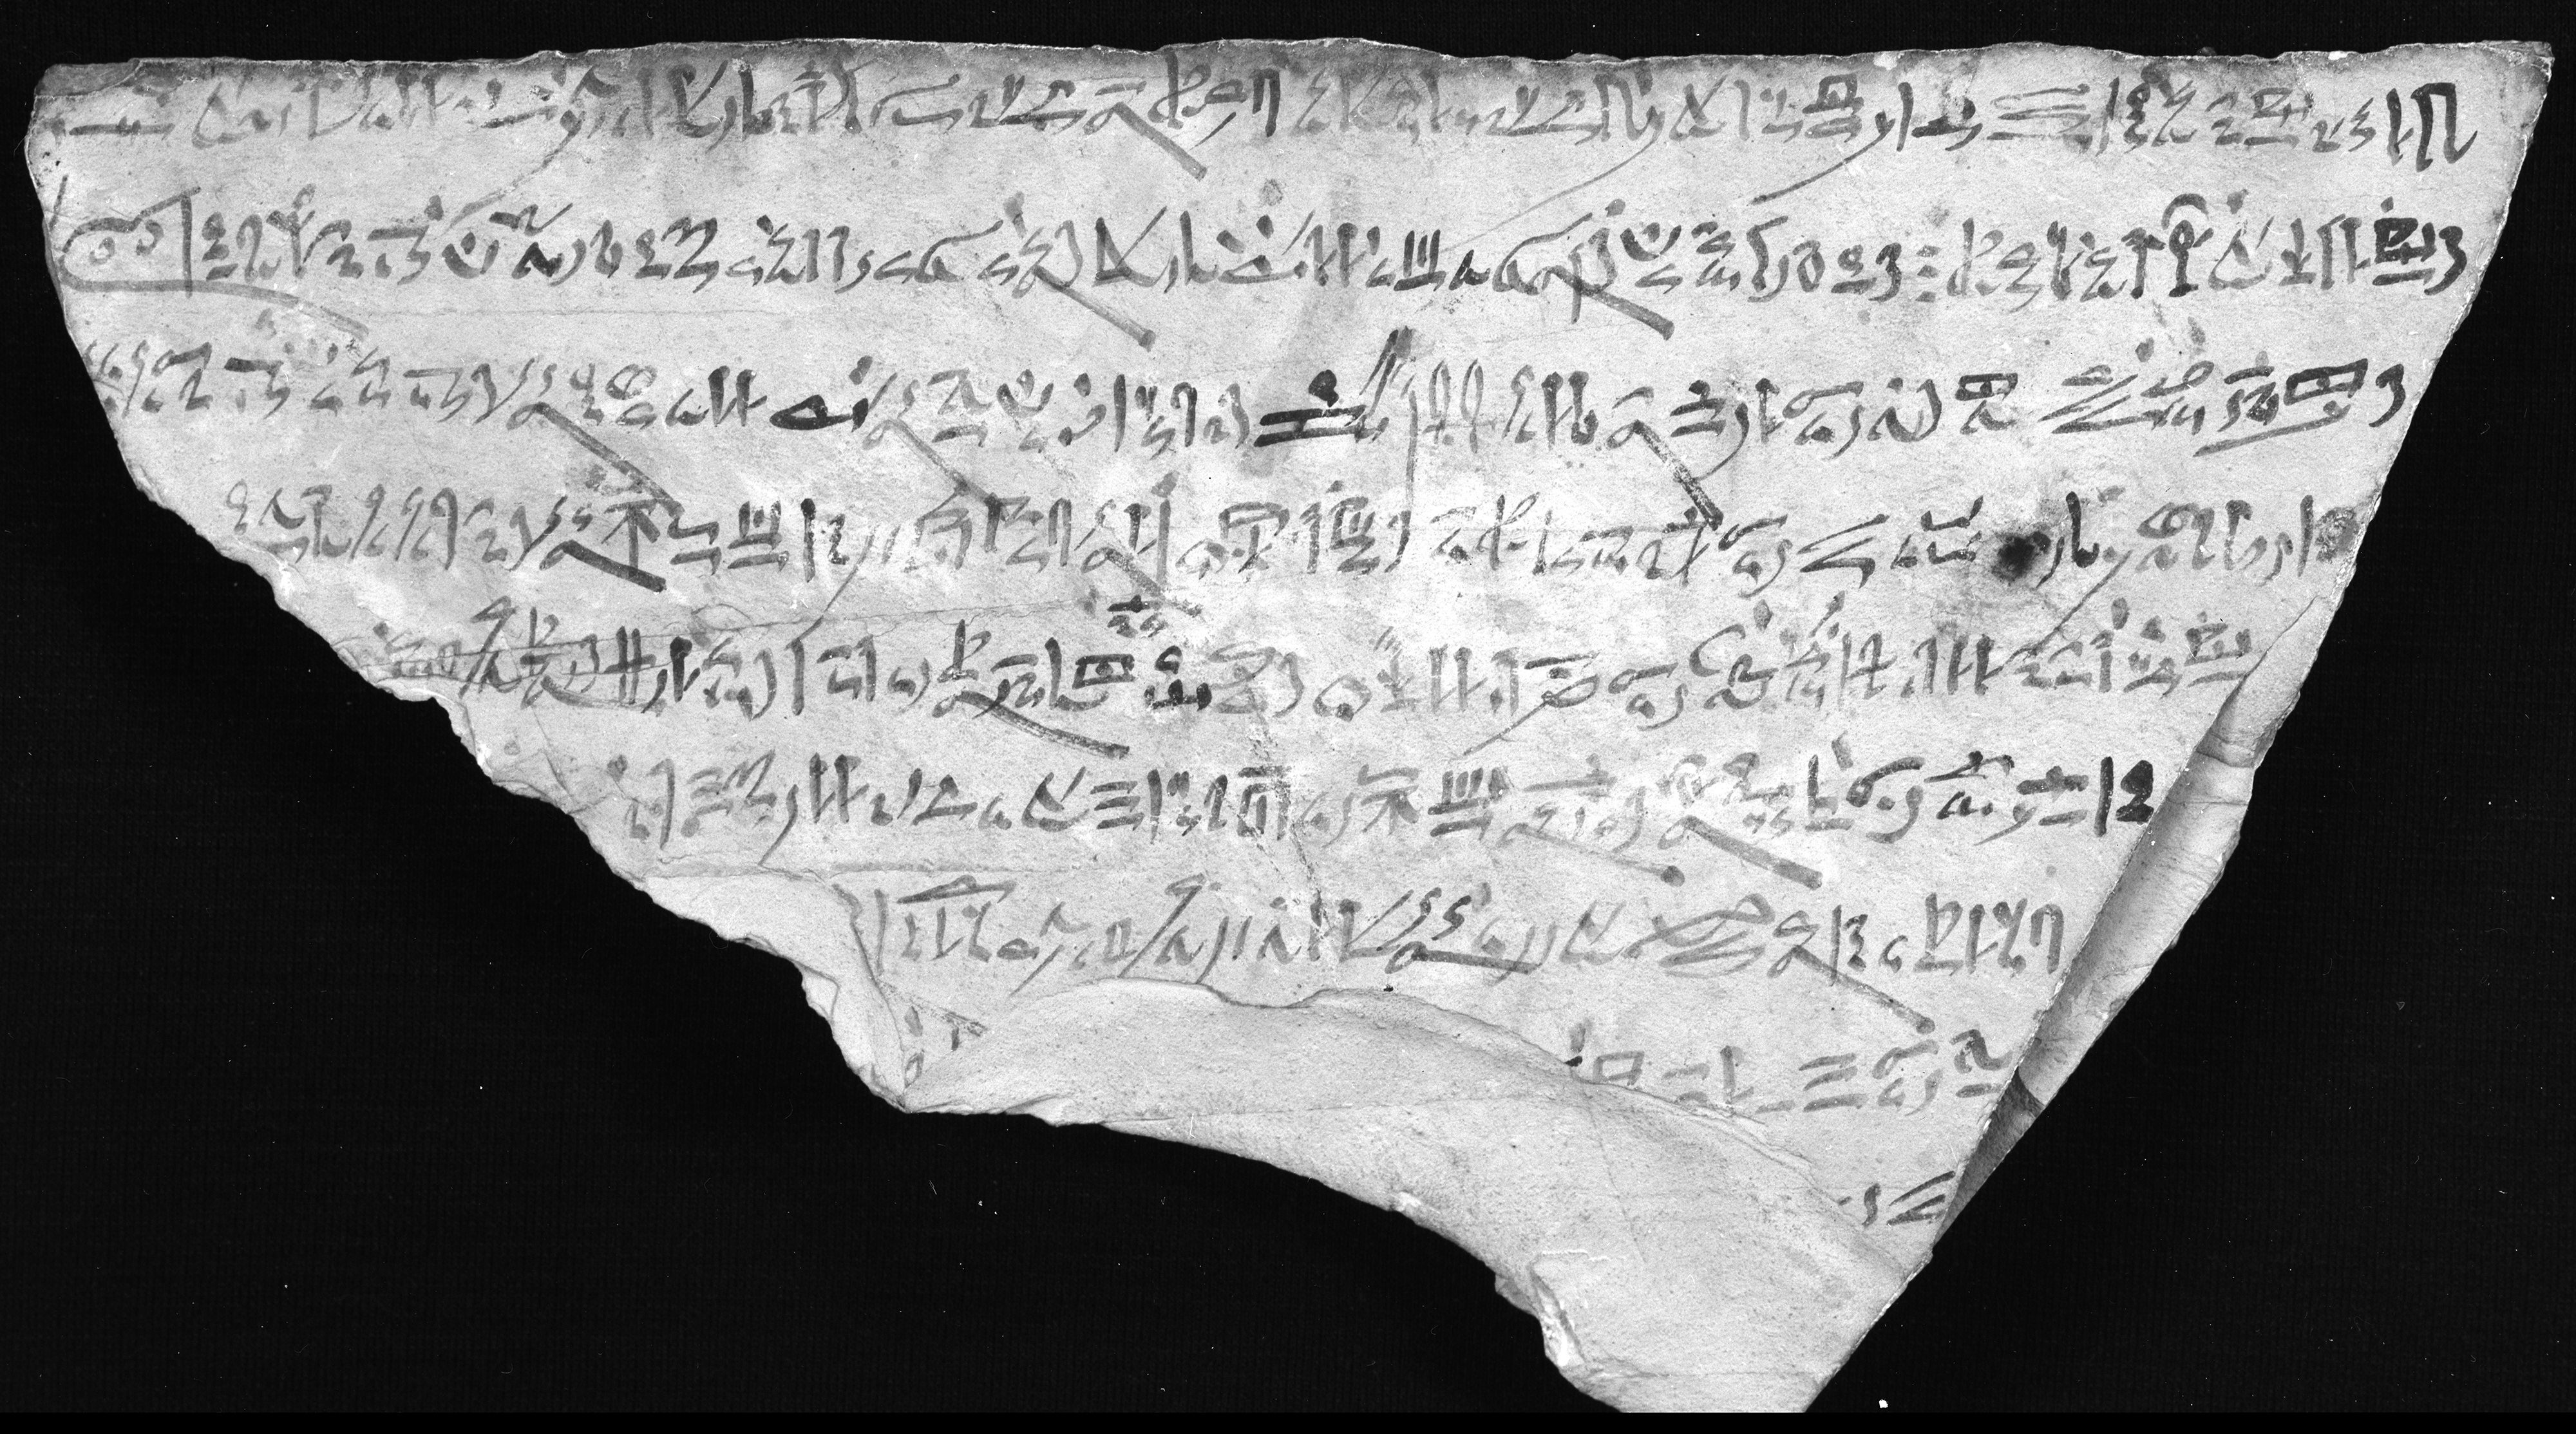 Image of O. Chicago OIM 12074, r° - Letter of Menna